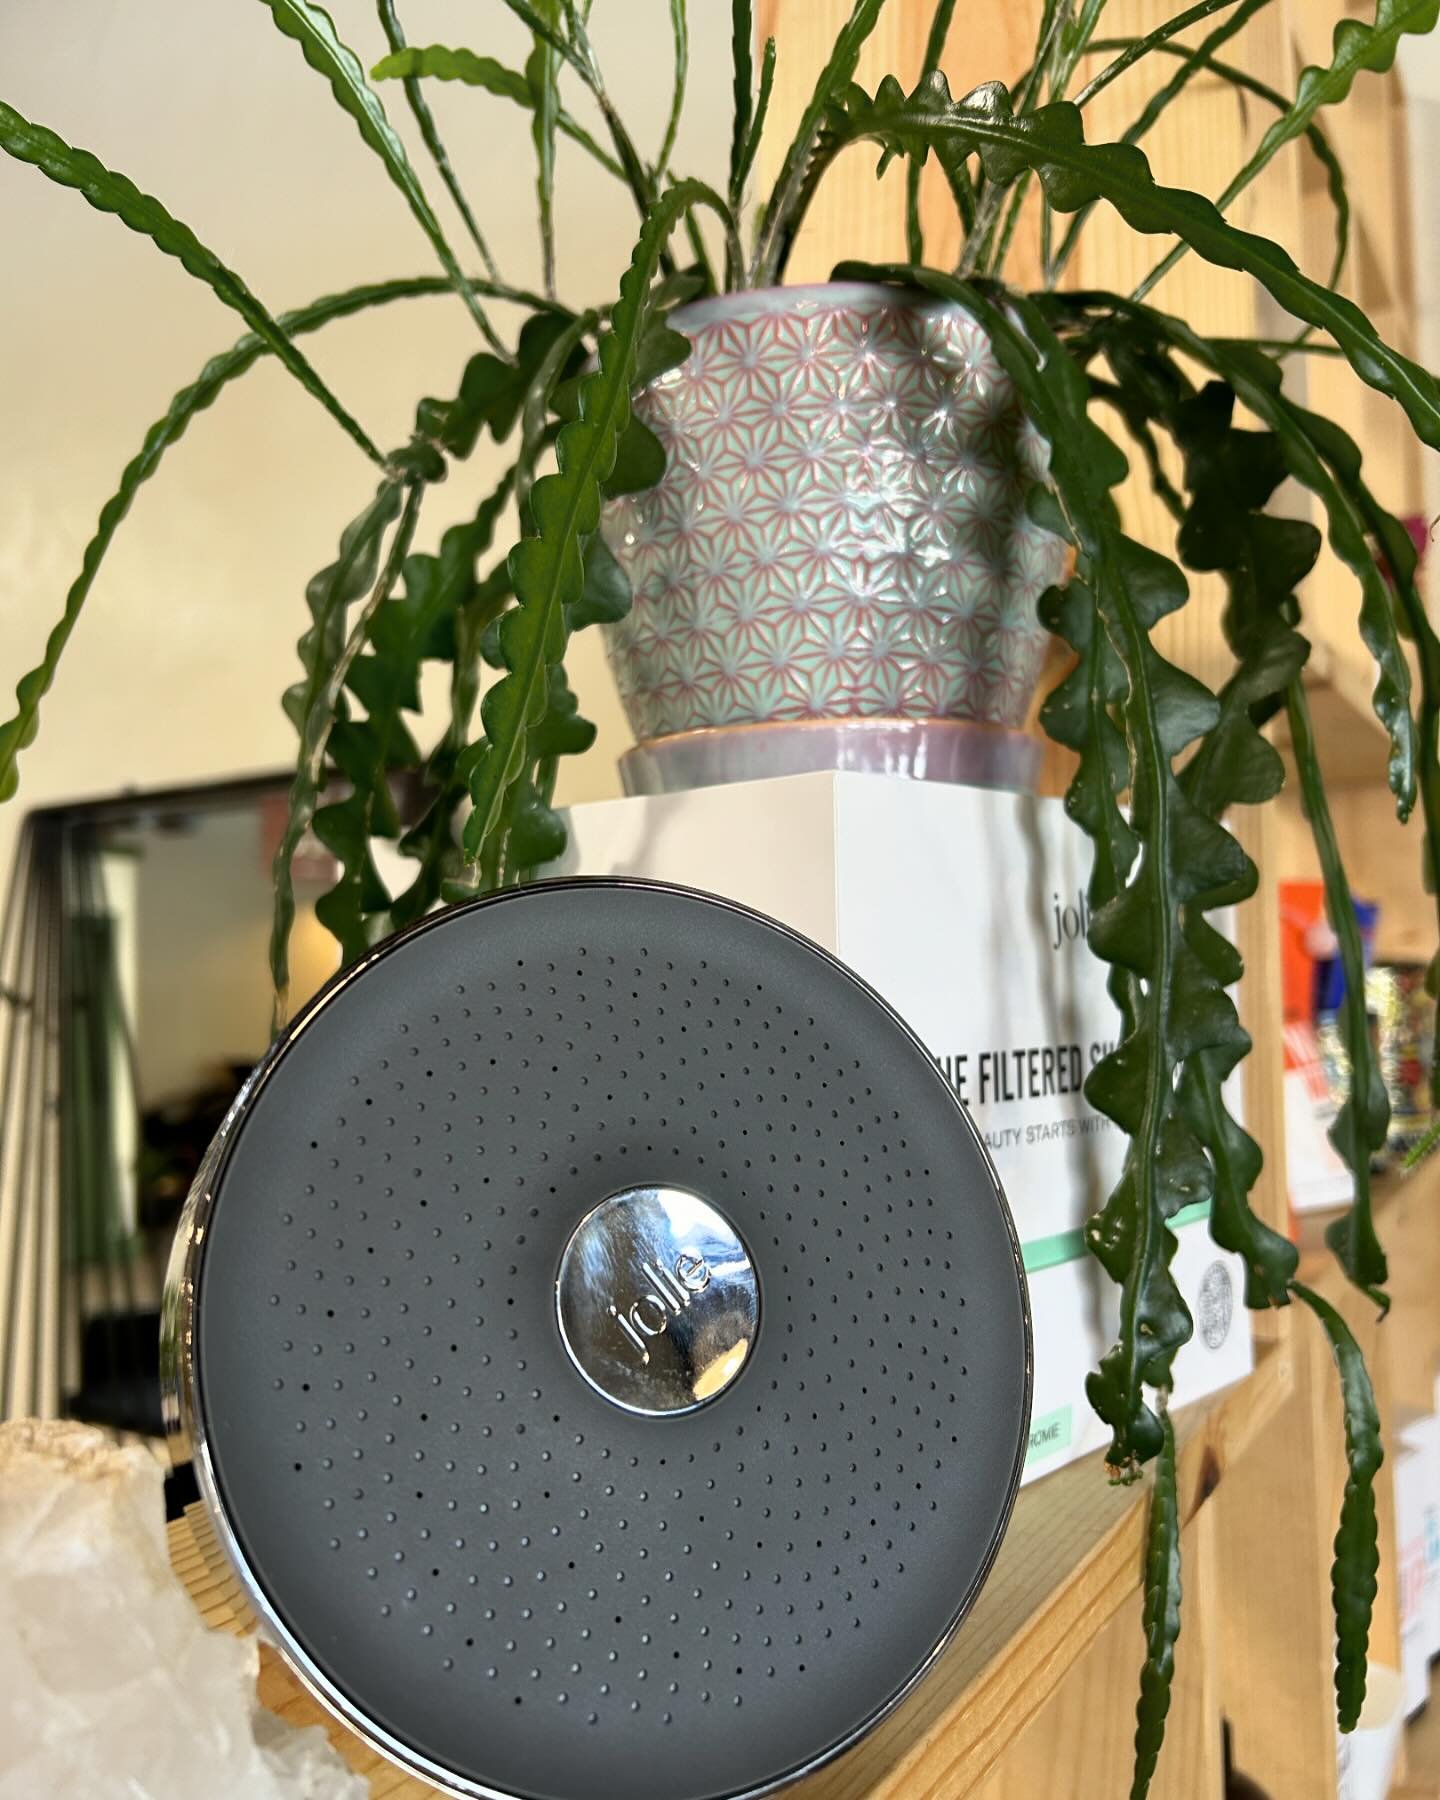 May&rsquo;s featured product is a good one 🚿✨ the Jolie Filtered Shower Head!

All through May, we&rsquo;ll be talking about why you need this in your shower

Swipe to learn a little more ➡️

Then stop by and shop in salon for 20% off your new favor